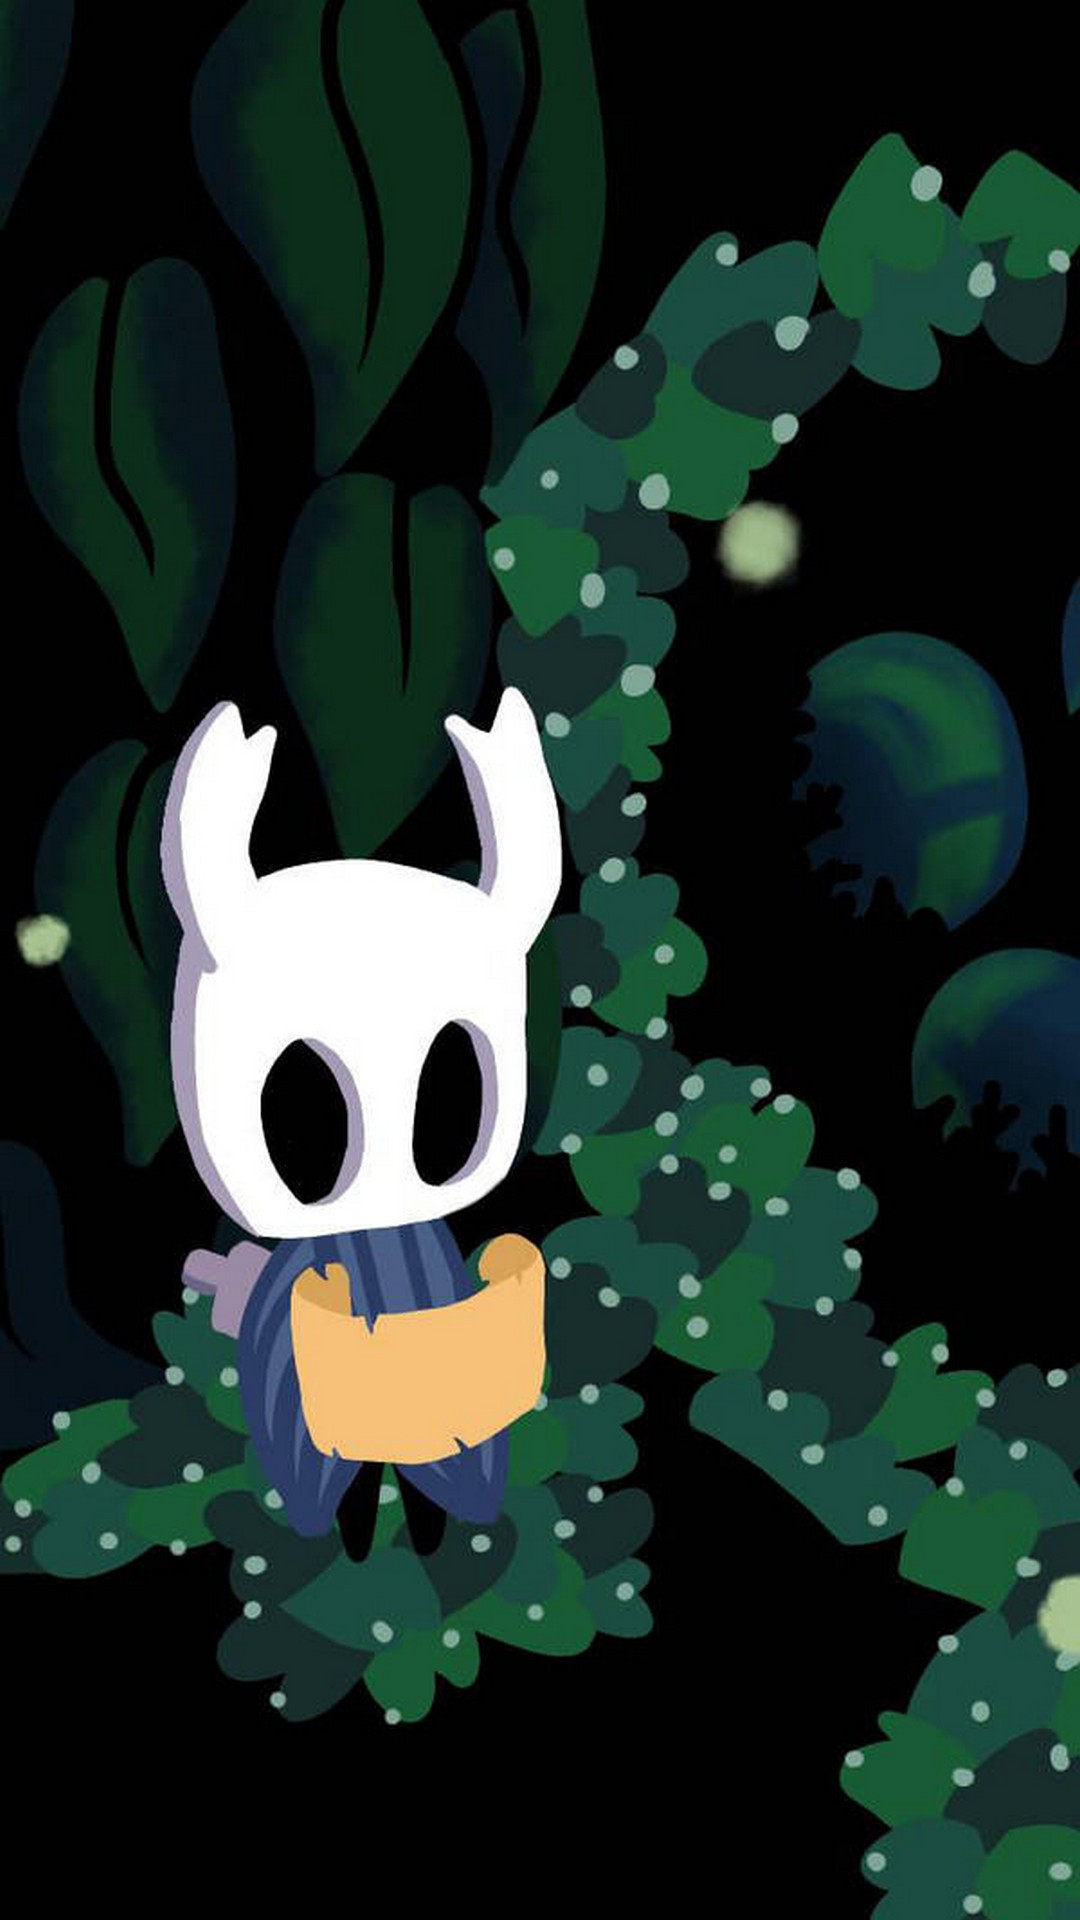 Android Wallpaper Hollow Knight With high-resolution 1080X1920 pixel. You can use this wallpaper for your Android backgrounds, Tablet, Samsung Screensavers, Mobile Phone Lock Screen and another Smartphones device